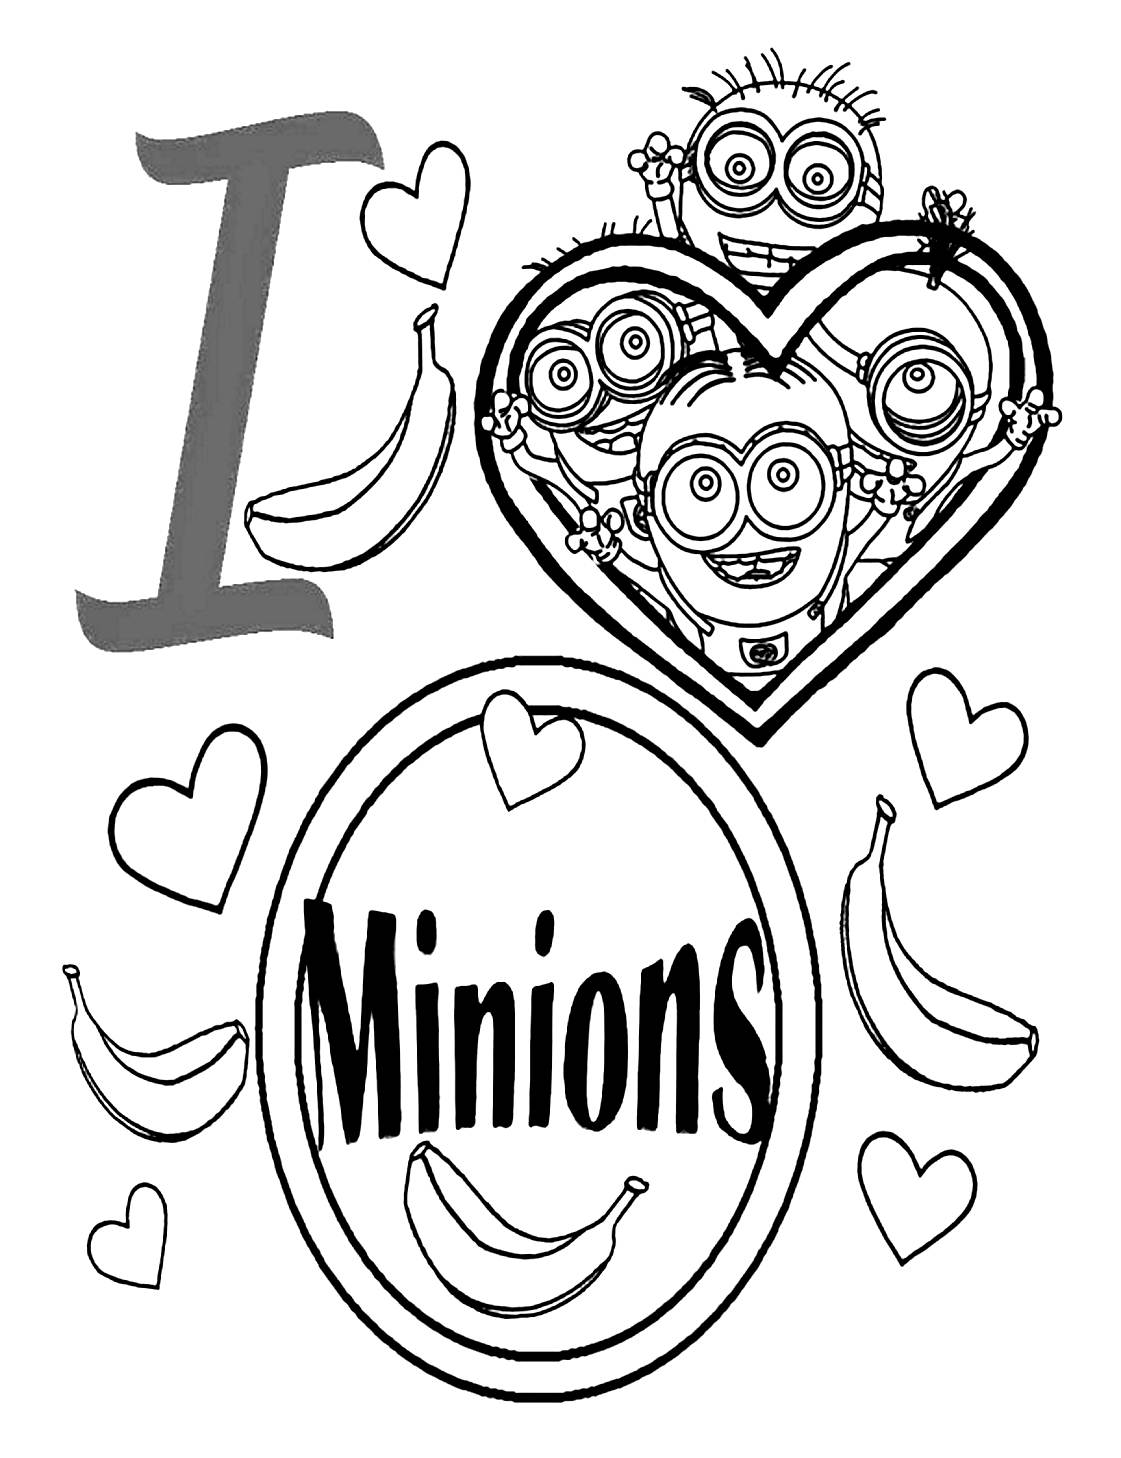 Simple Minions coloring page